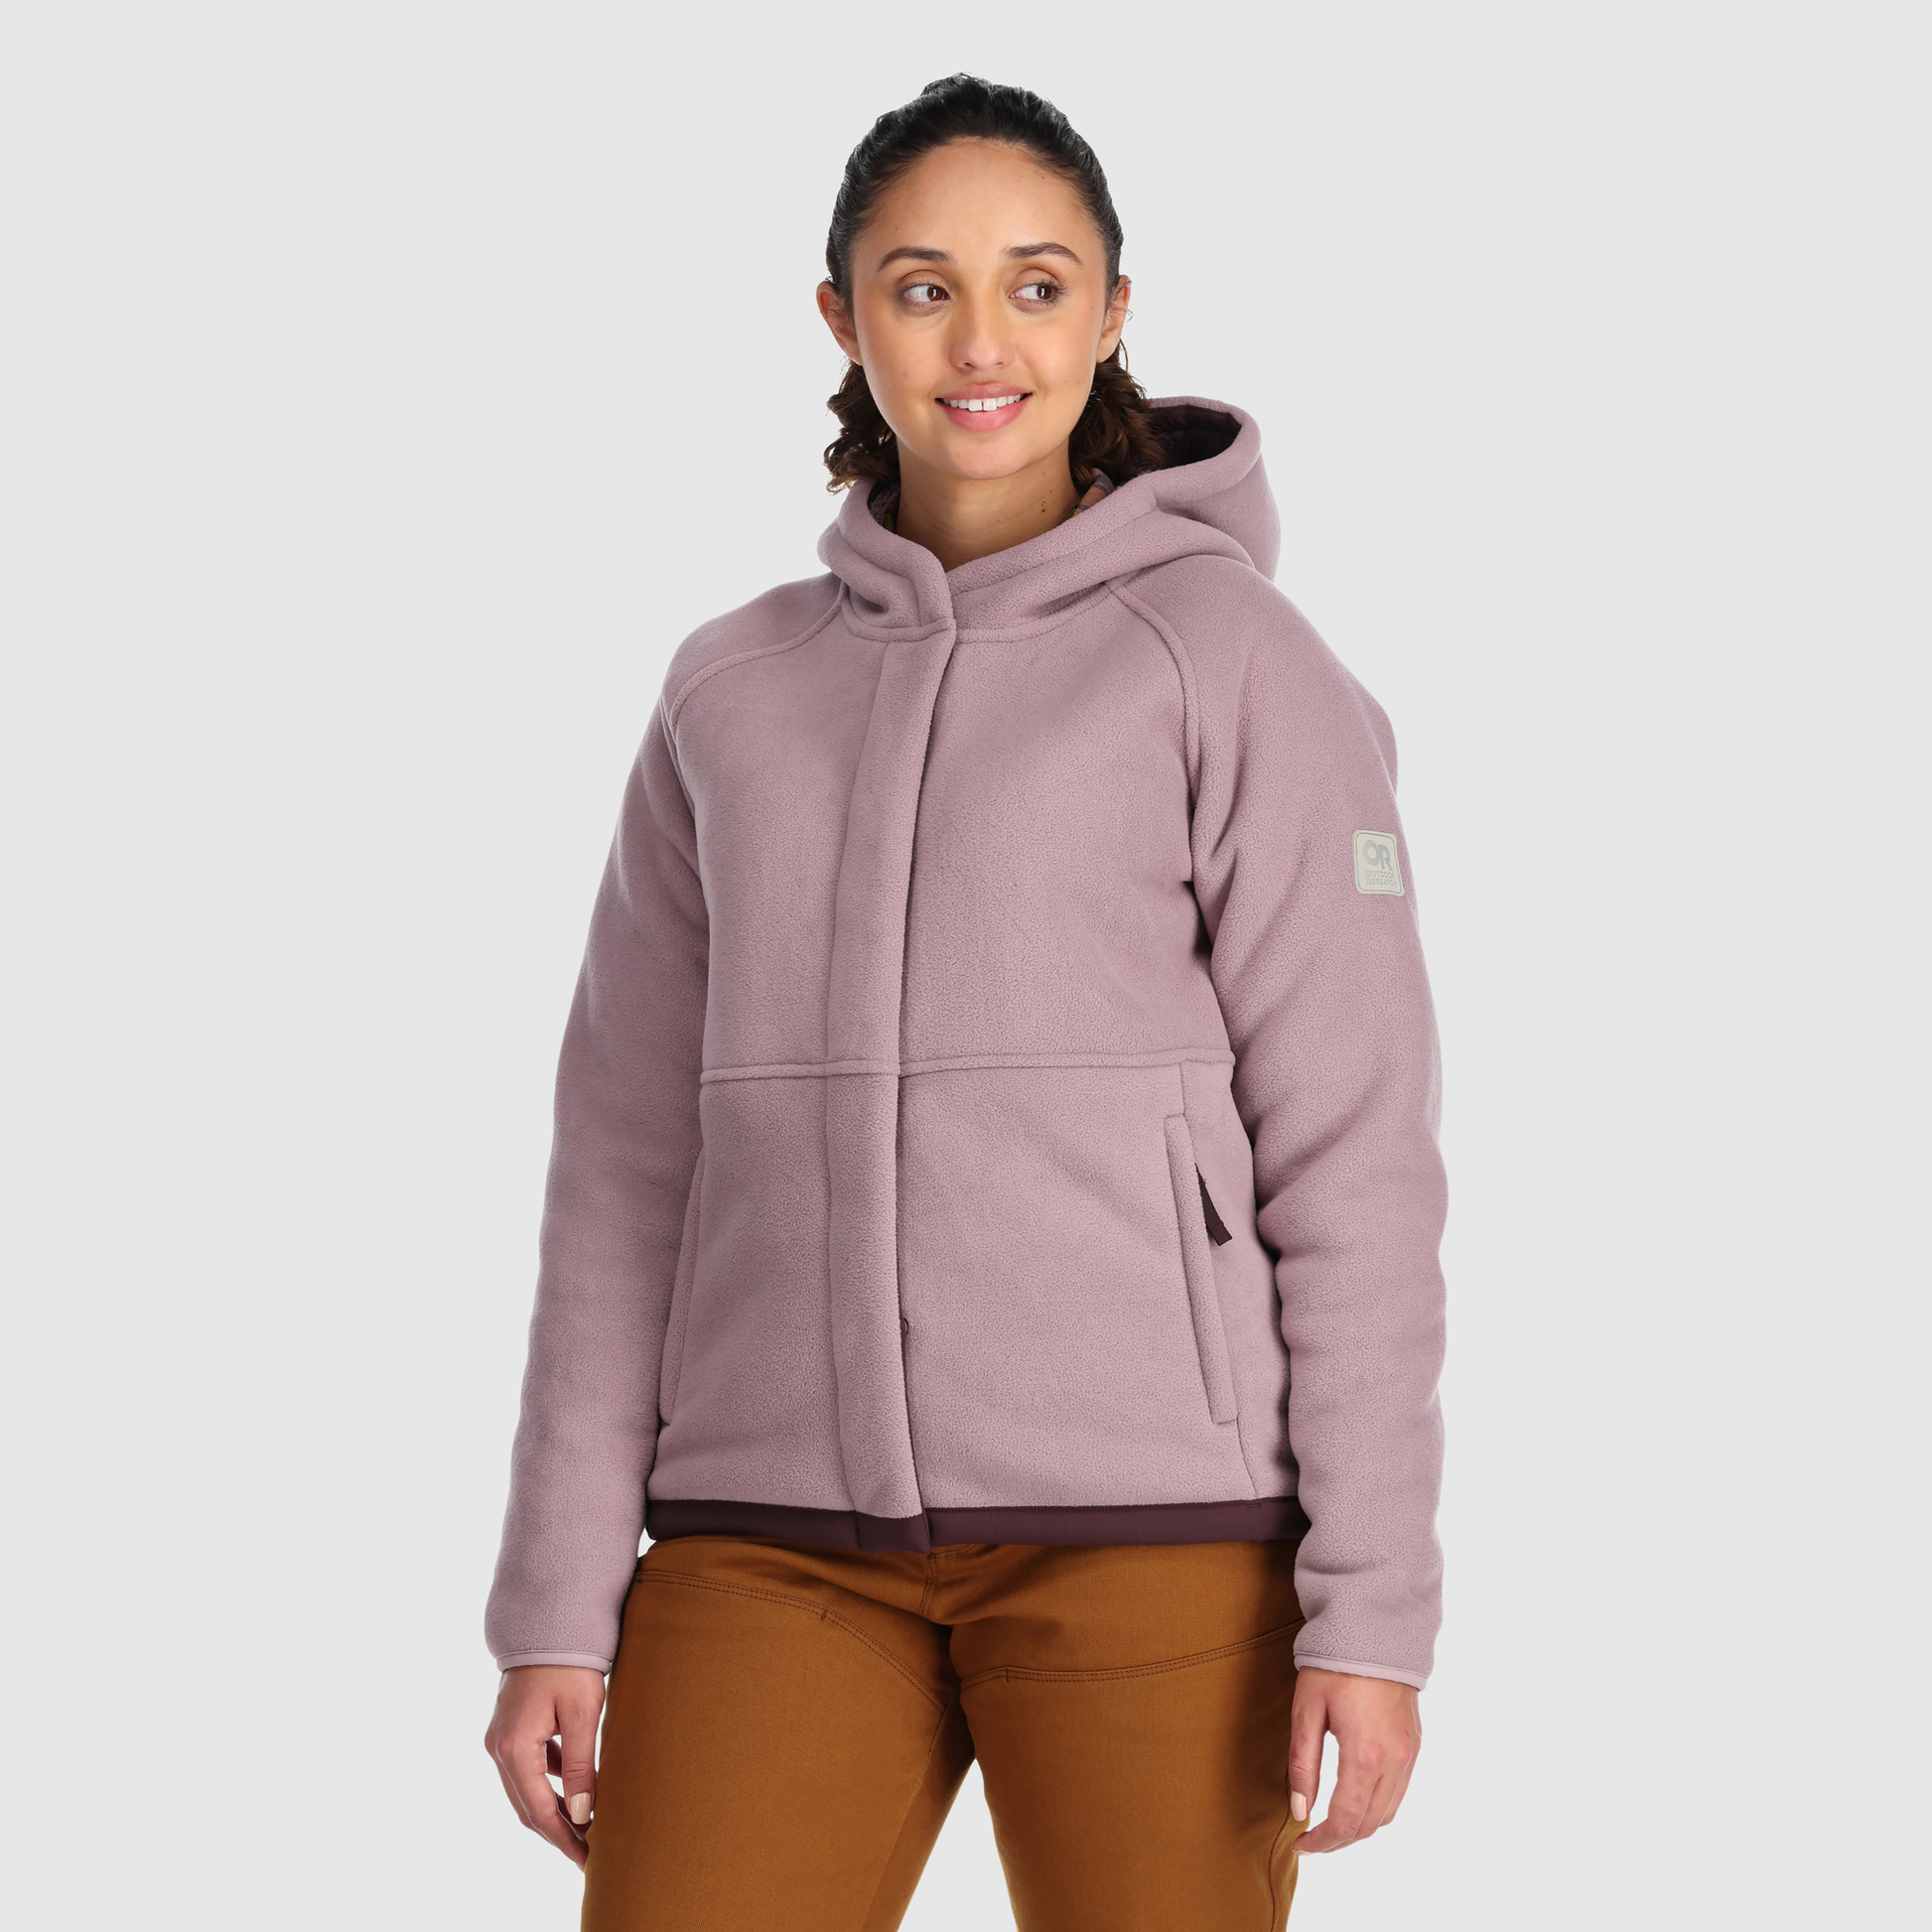 Fleece Sherpa jackets are the ultimate cold weather uniform right now